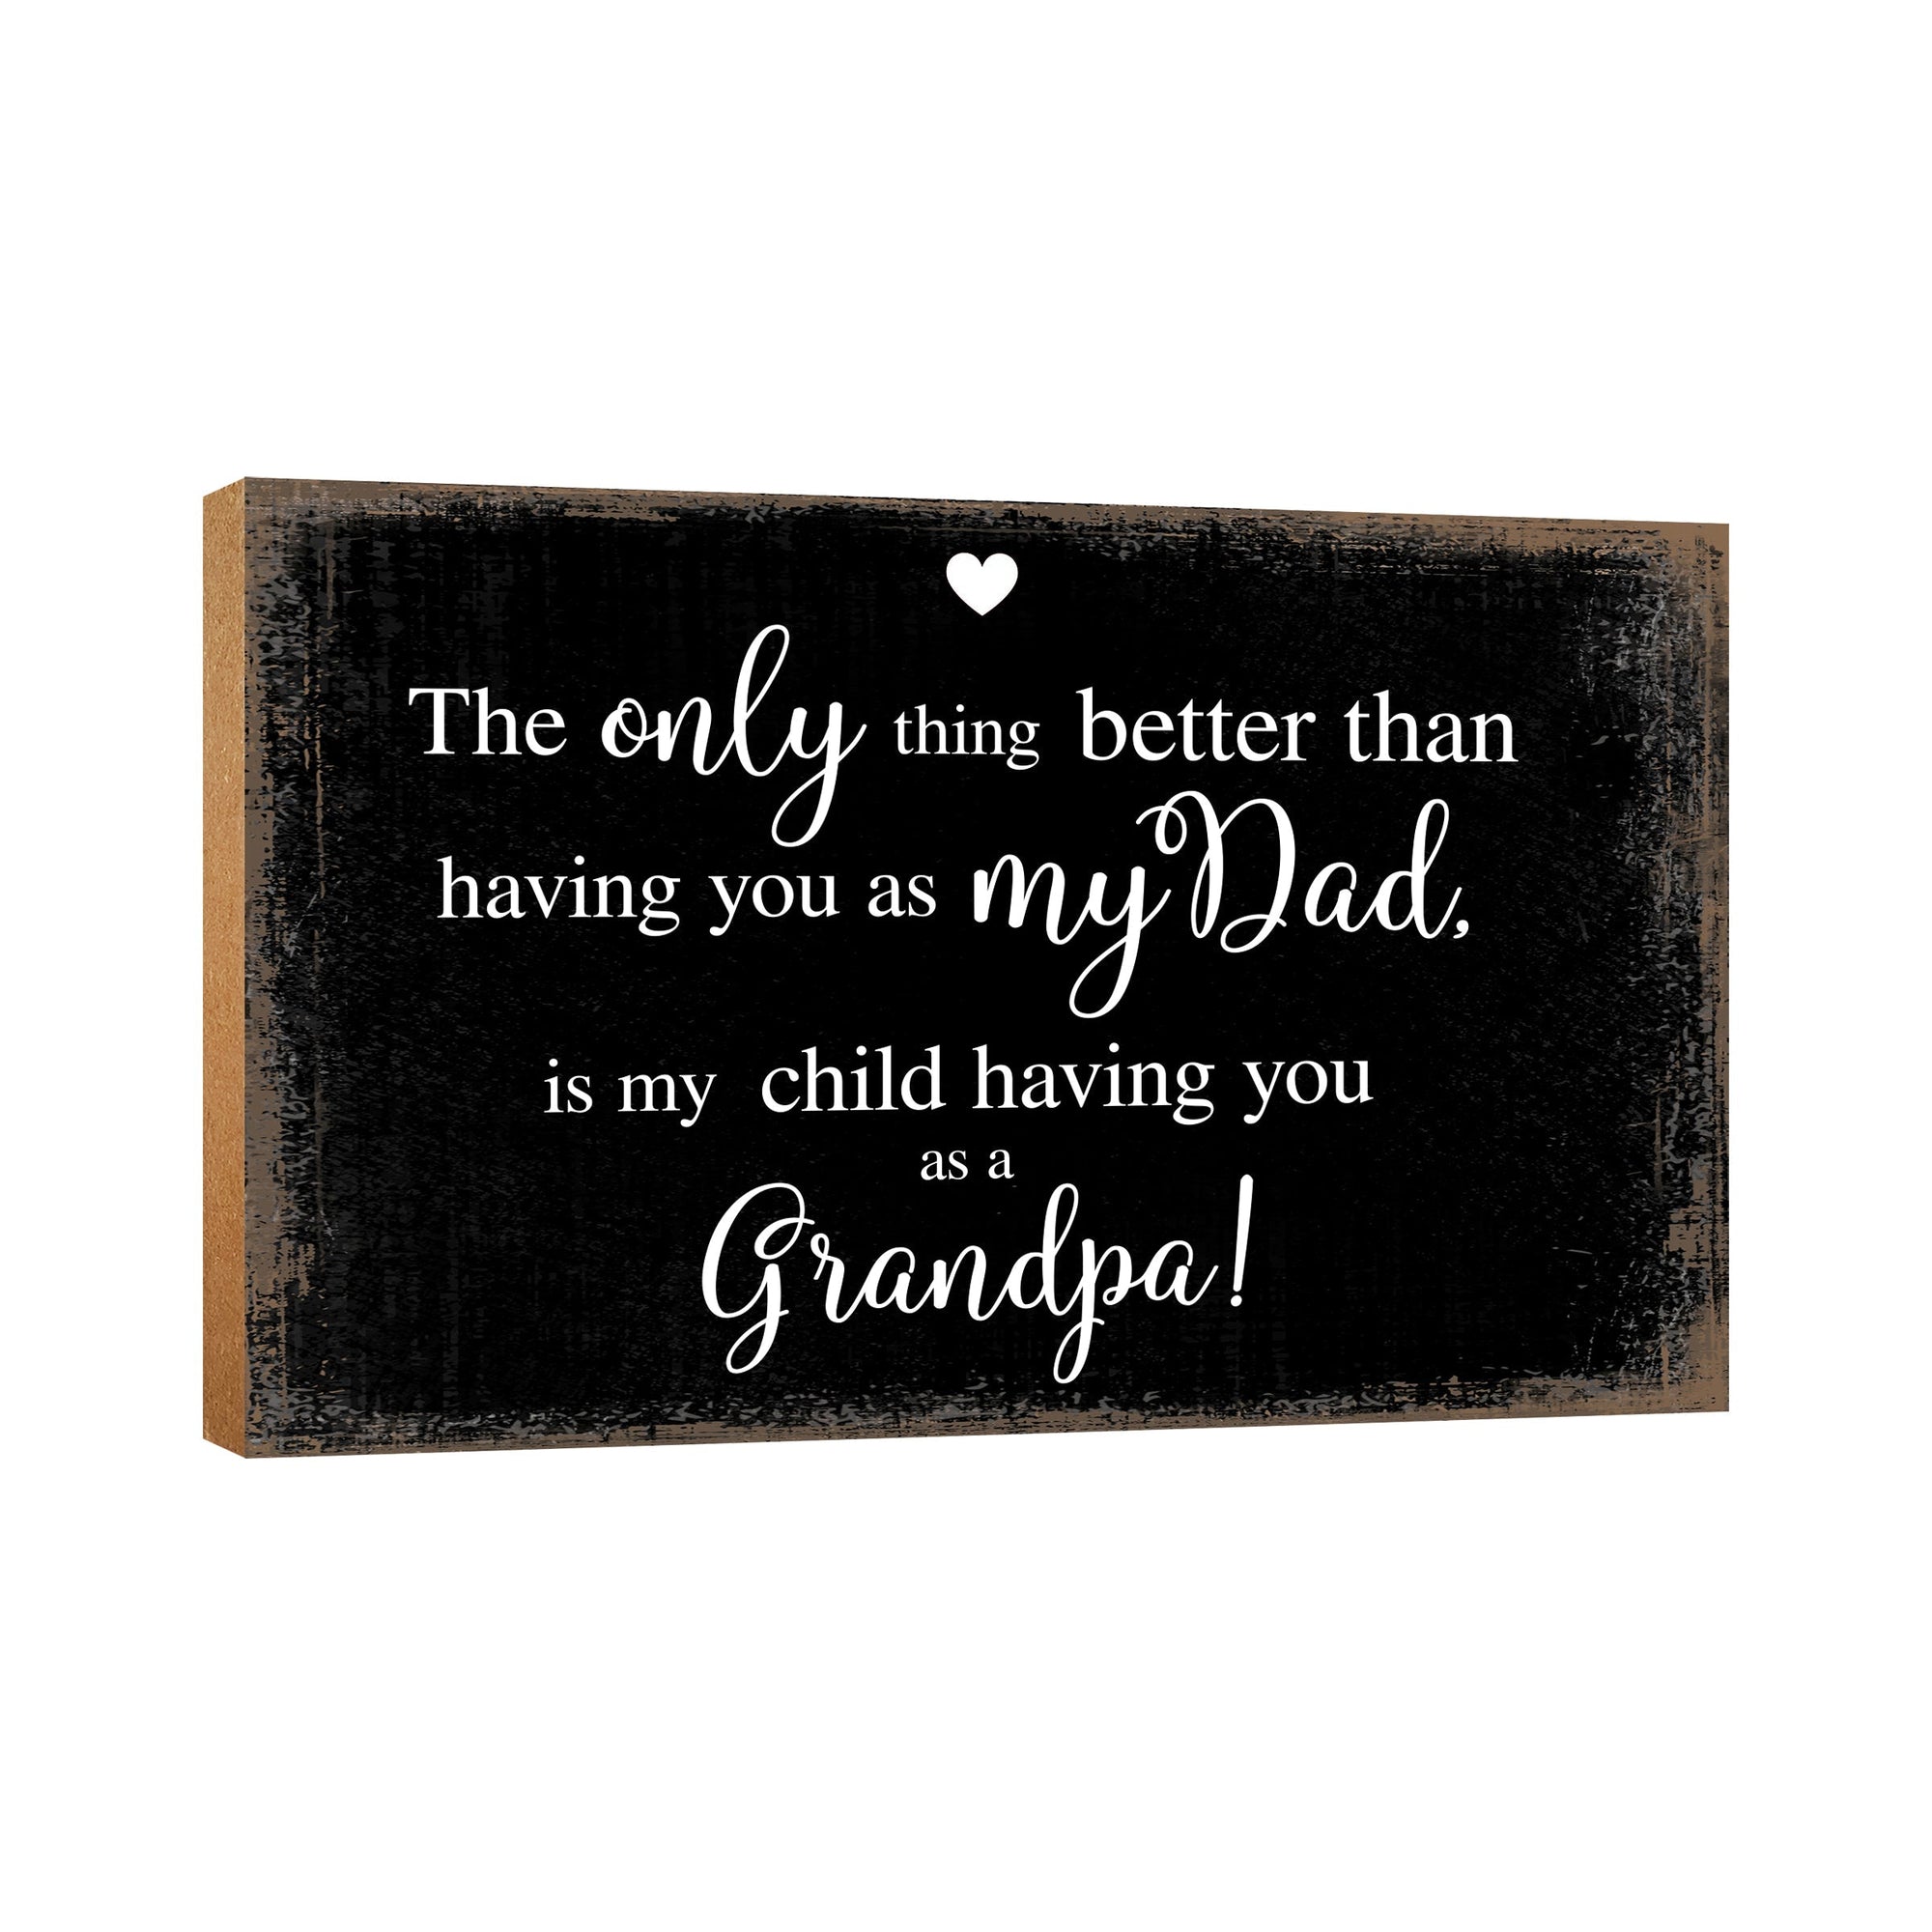 Grandfather's special gift table decor, a thoughtful addition to his shelf.